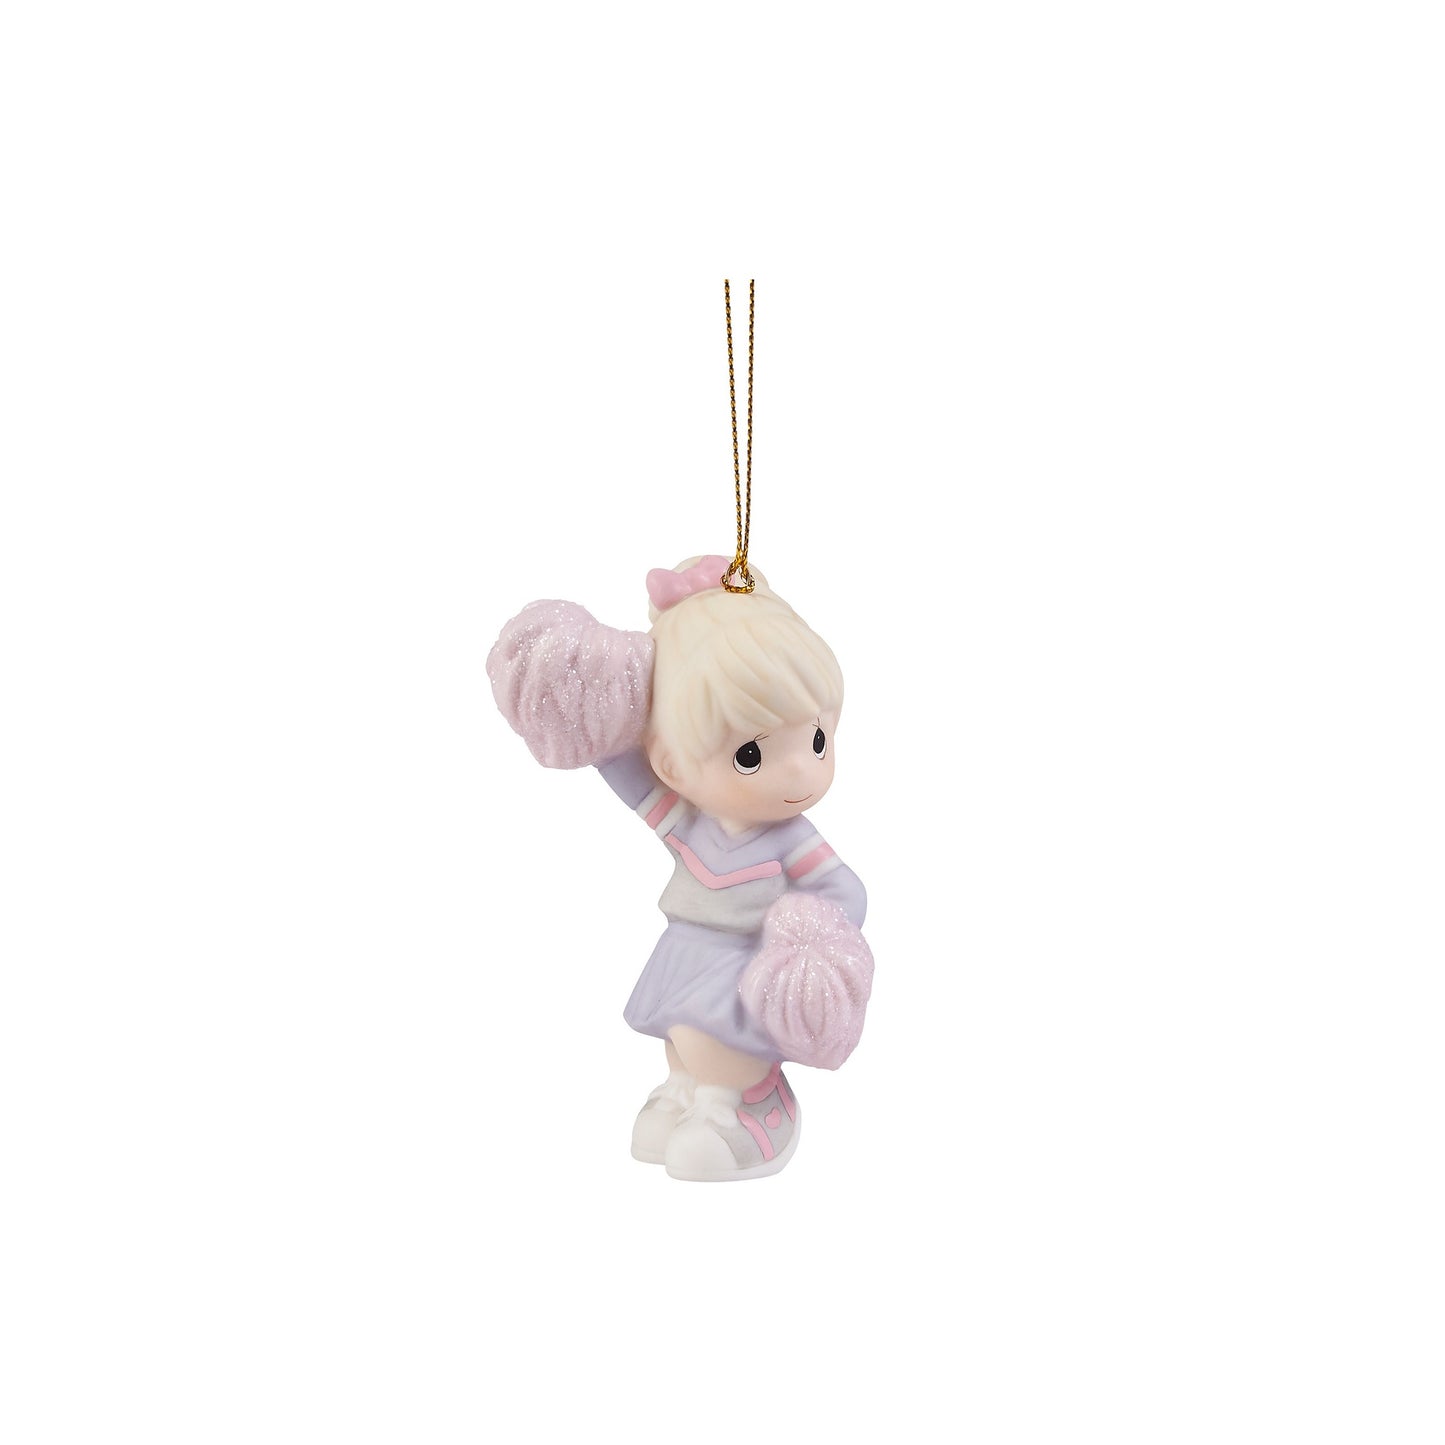 Reach For The Sky Ornament Blonde Girl Ornament by Precious Moments